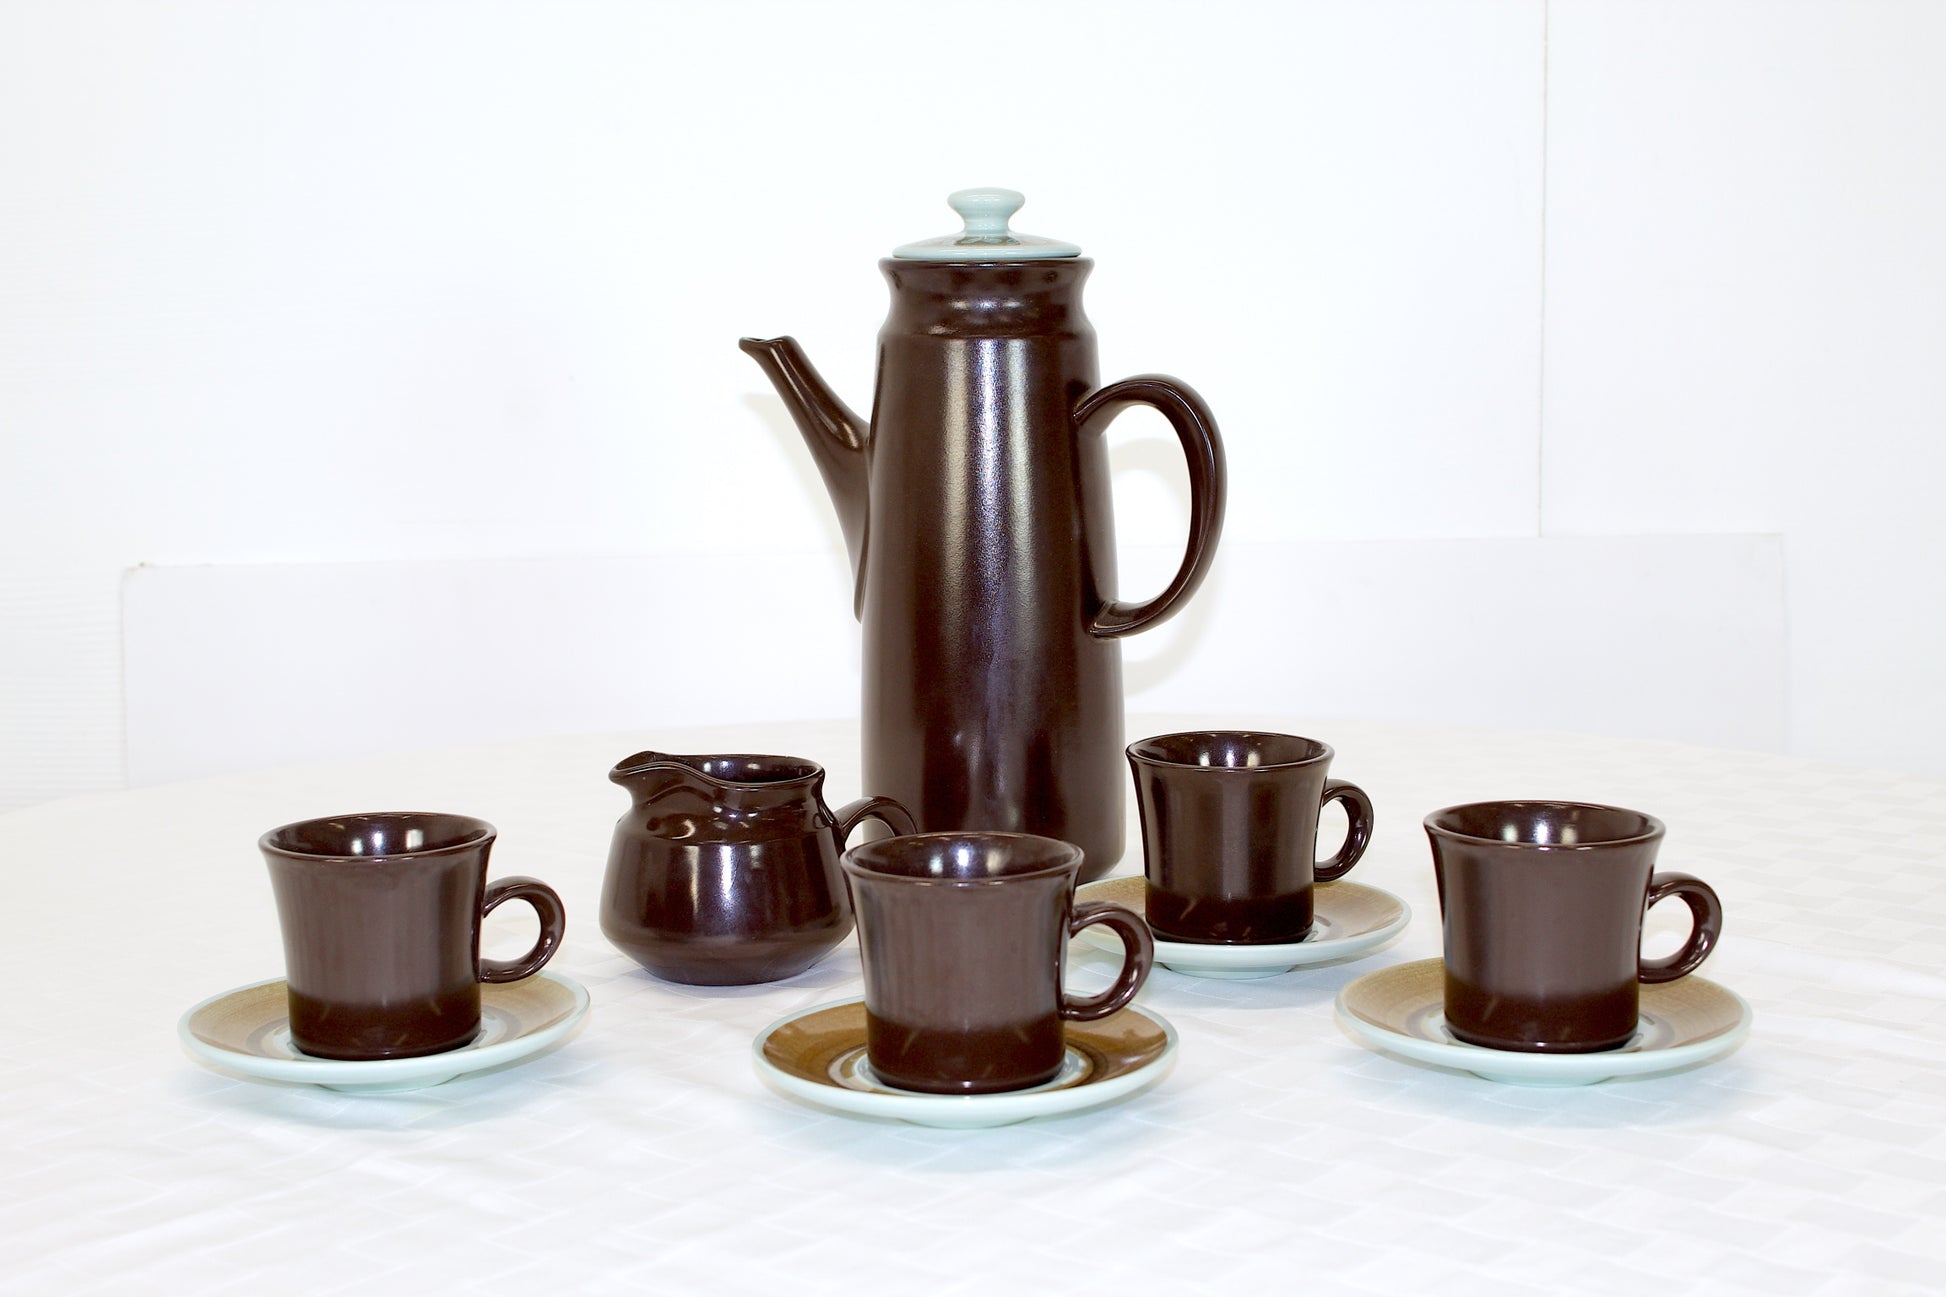 Brown Stoneware Coffee cups and Pitcher